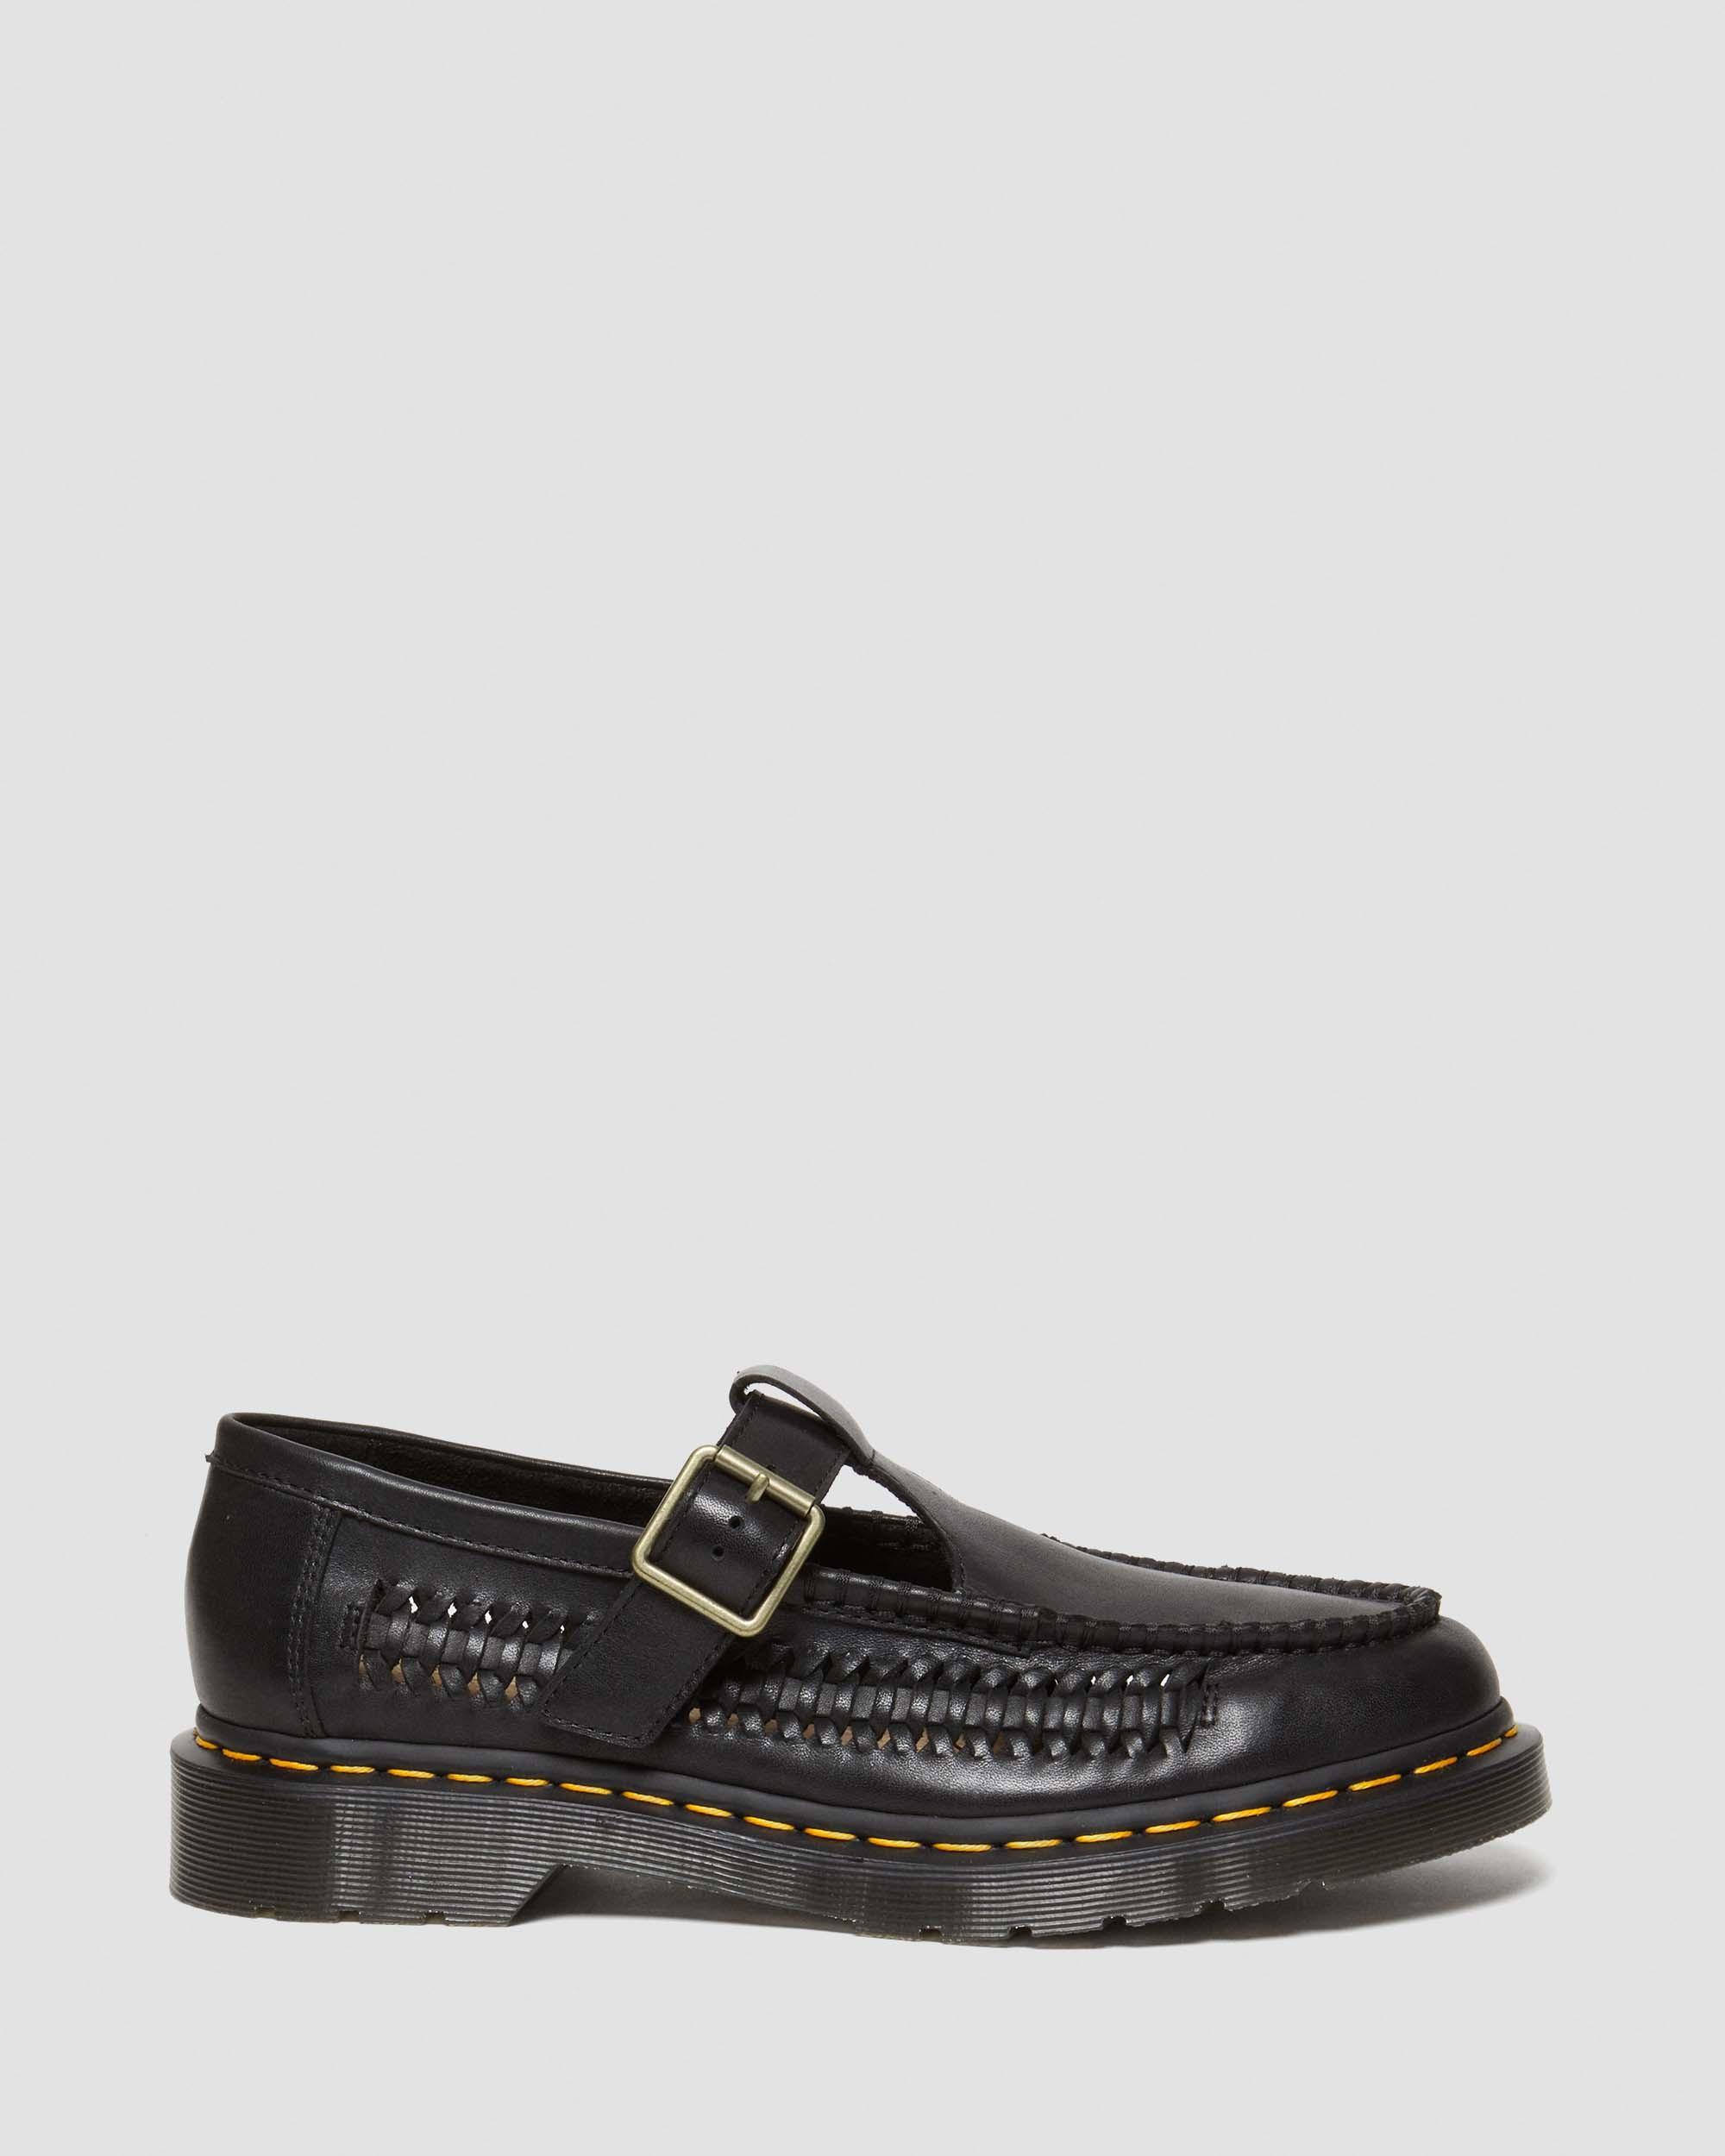 Adrian T-Bar Woven Leather Mary Jane Shoes in Black | Dr. Martens